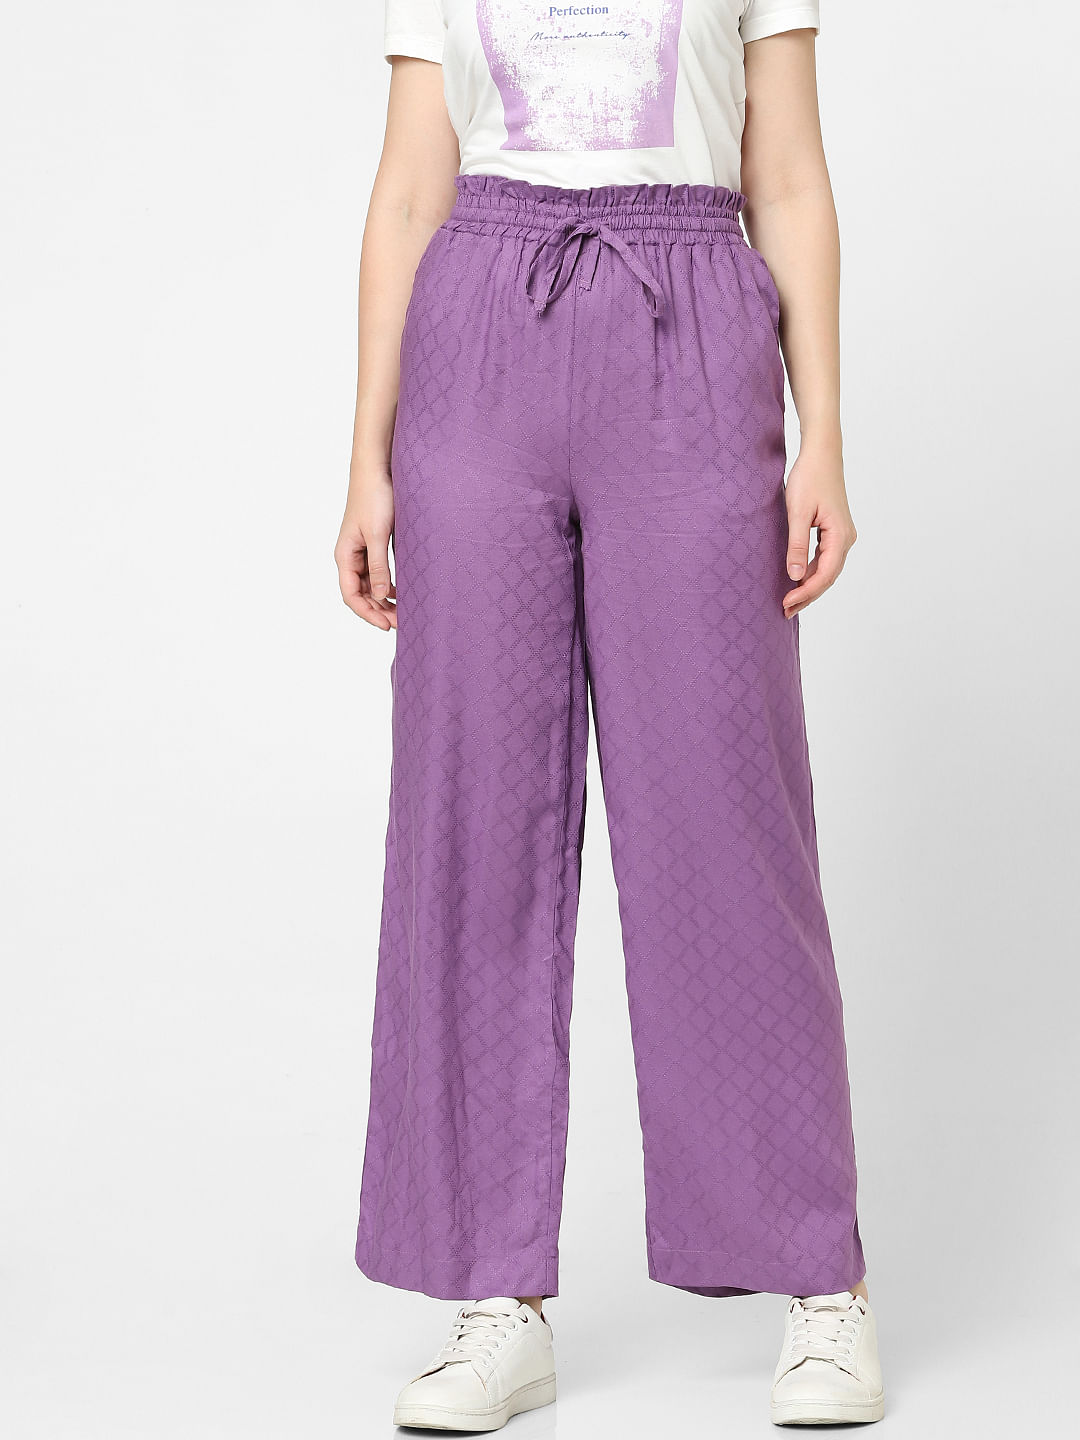 Shop Baroque Print Pants for Women from latest collection at Forever 21   367760